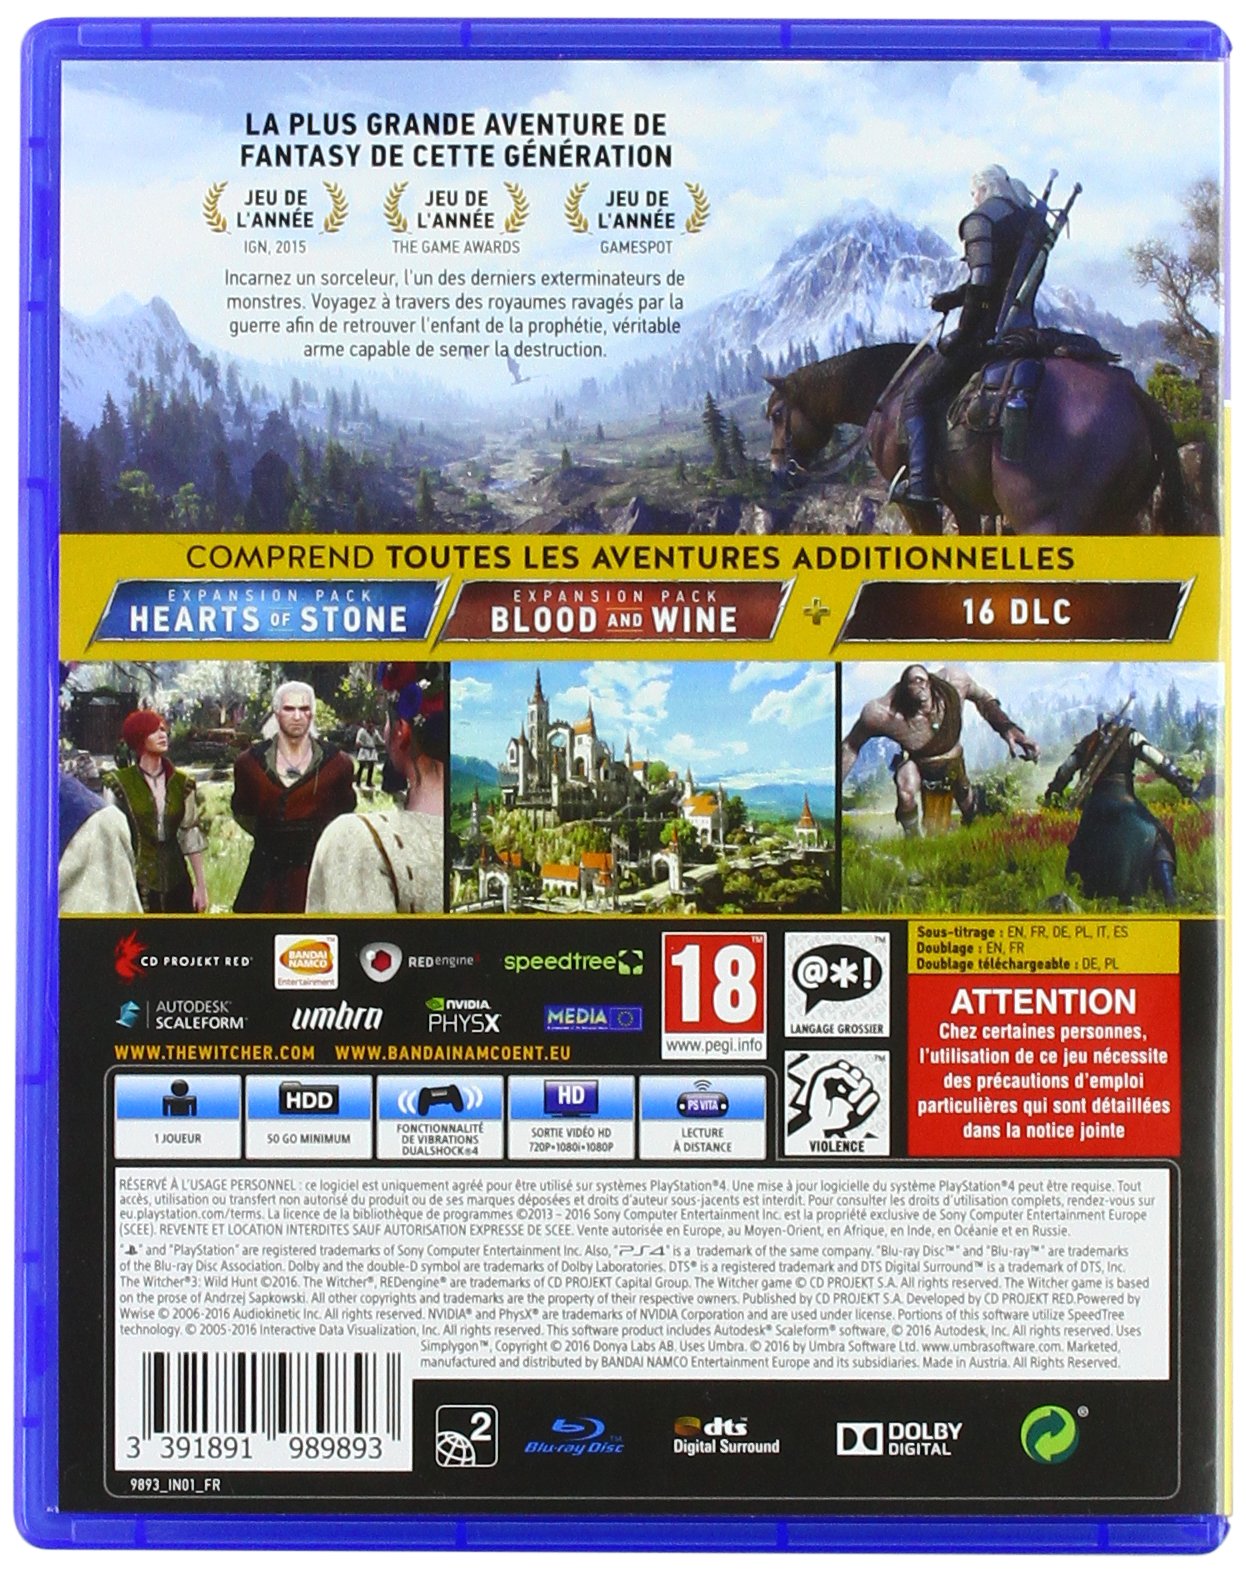 BANDAI NAMCO ENTERTAINMENT-The Witcher 3: Wild Hunt GOTY Edition Jeu PS4